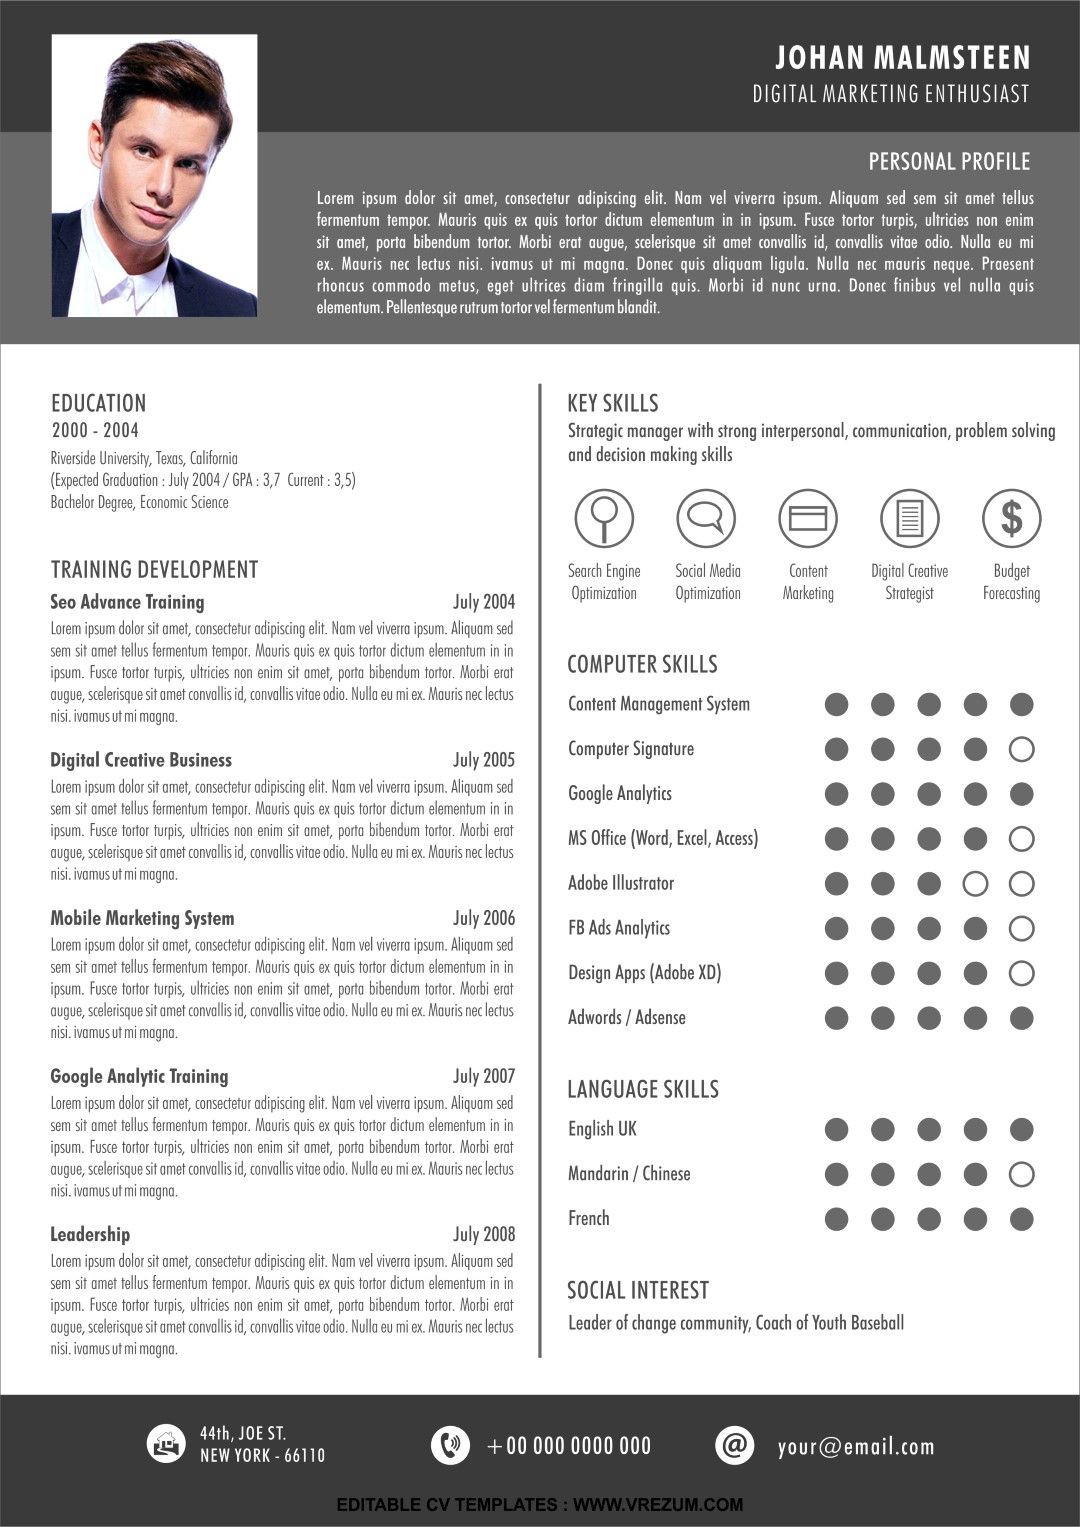 Resume Template Free Download for Fresh Graduate Editable) – Free Cv Templates for Fresh Graduate Cv Template …